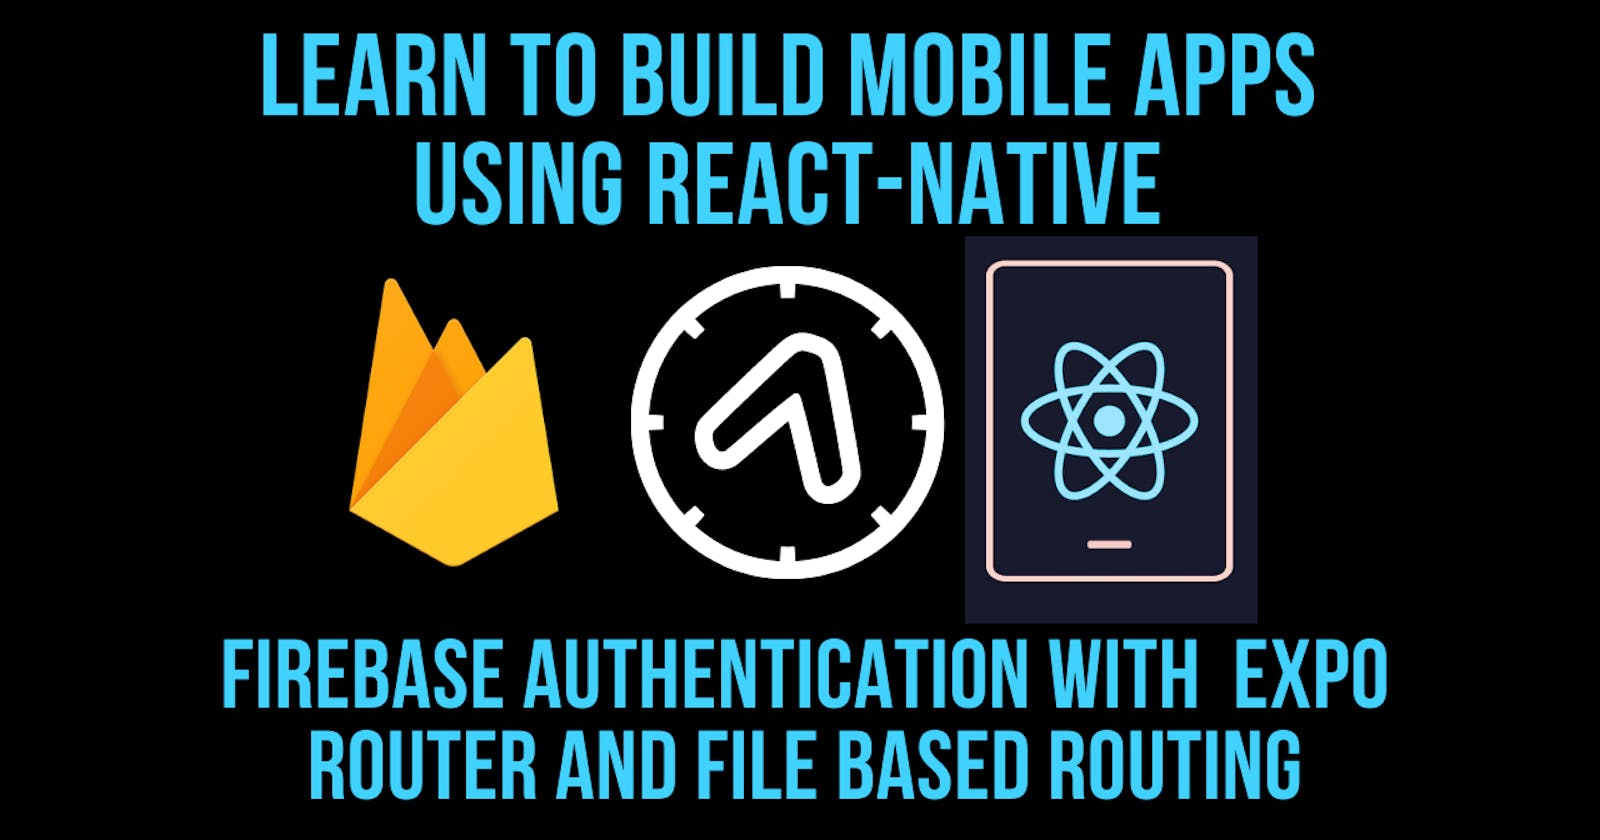 ReactNative Expo File Based Routing with Firebase Authentication